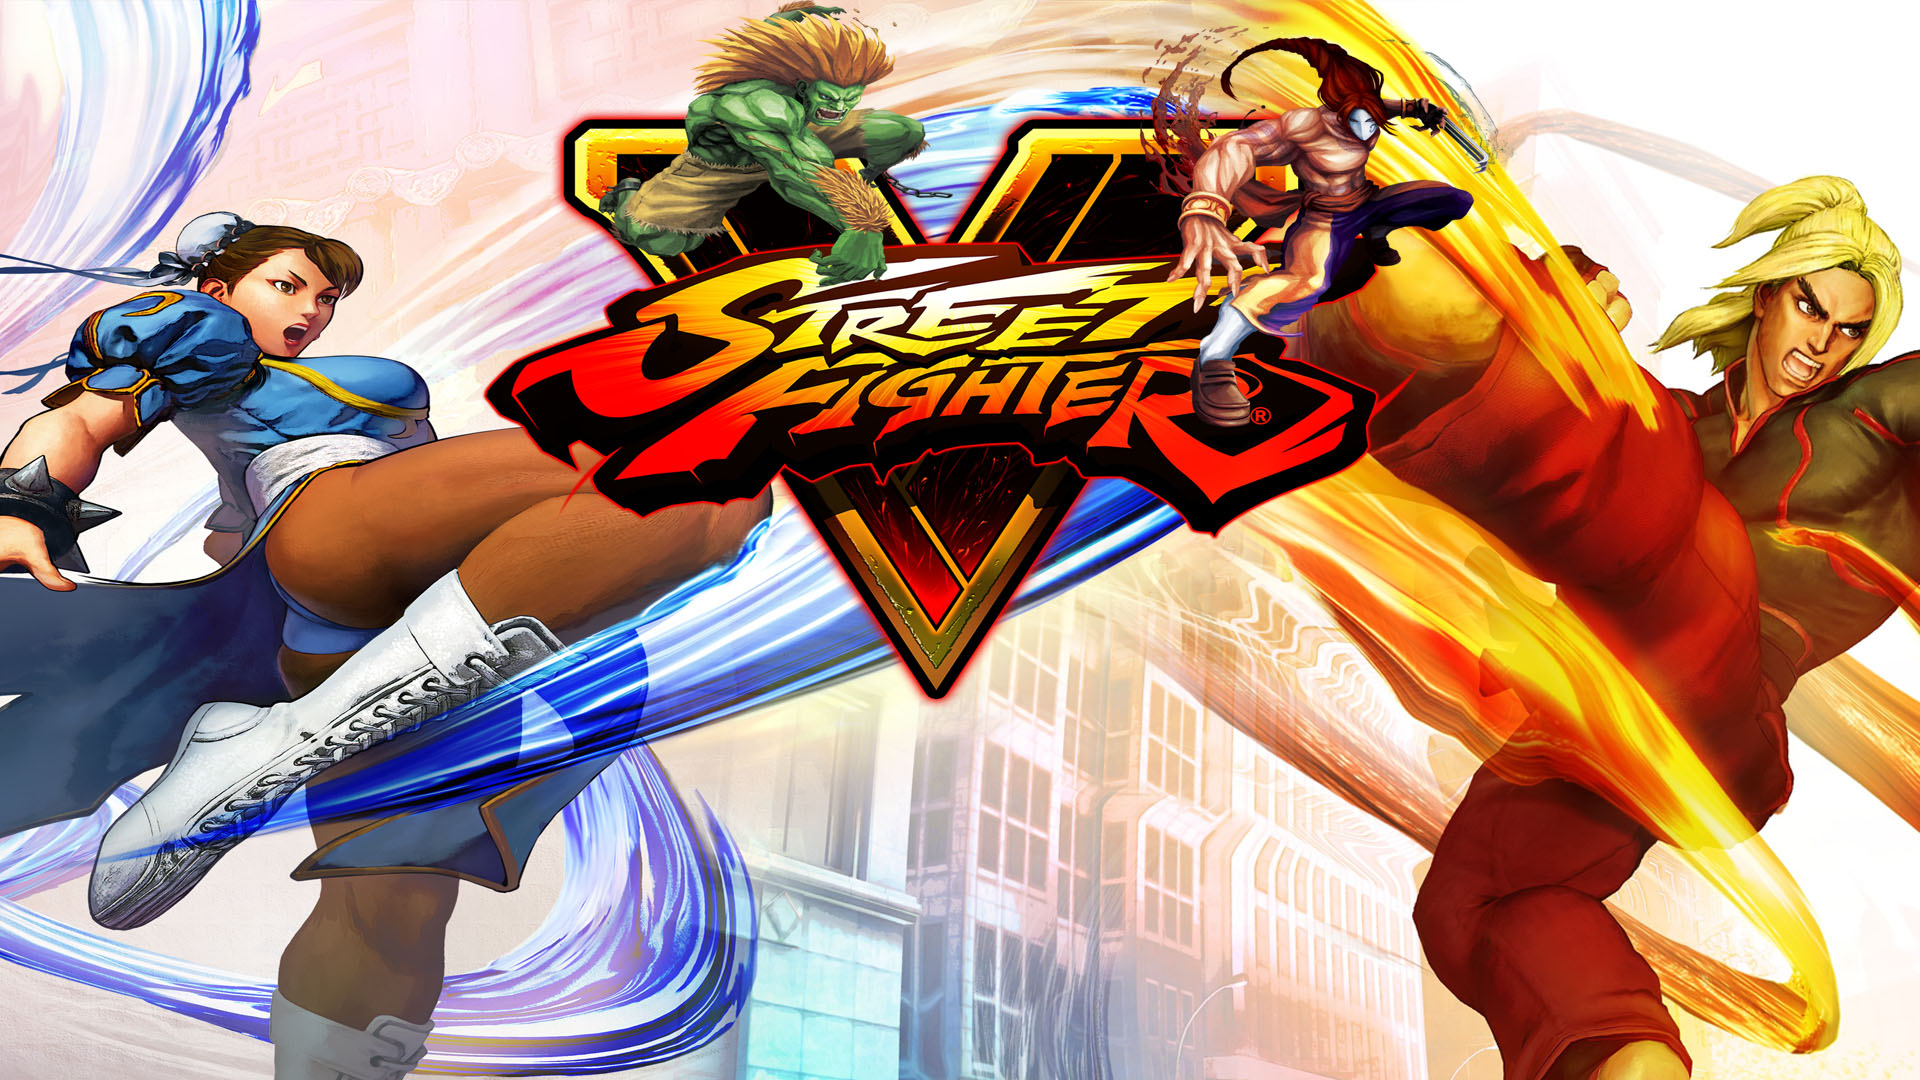 street fighter wallpaper hd,pc game,games,technology,fictional character,team